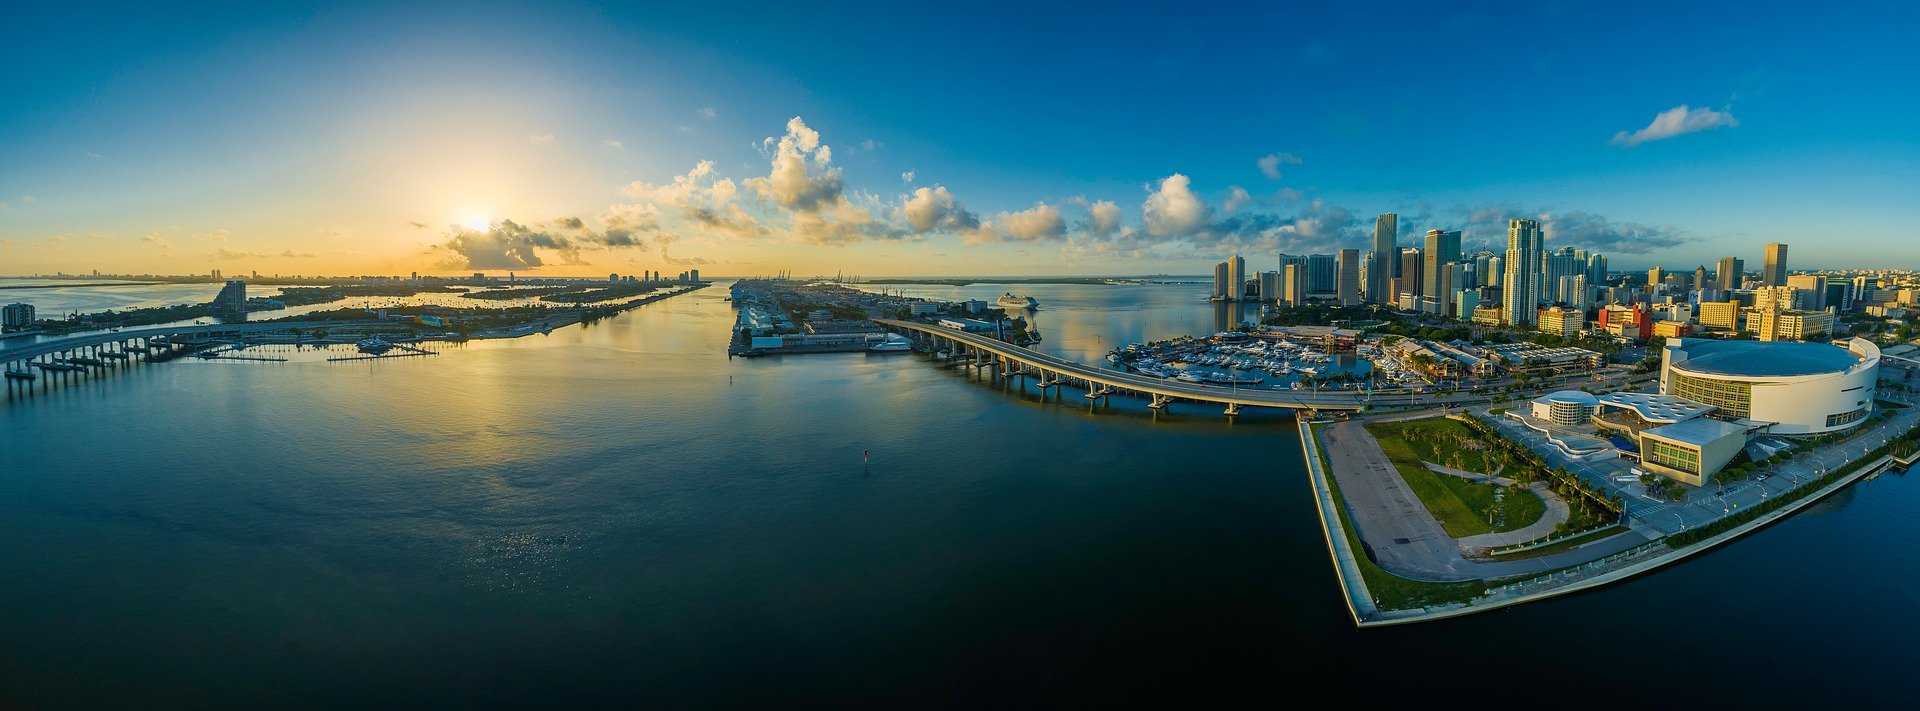 WHAT TURNS MIAMI INTO SUCH A GREAT PLACE TO START A BUSINESS?